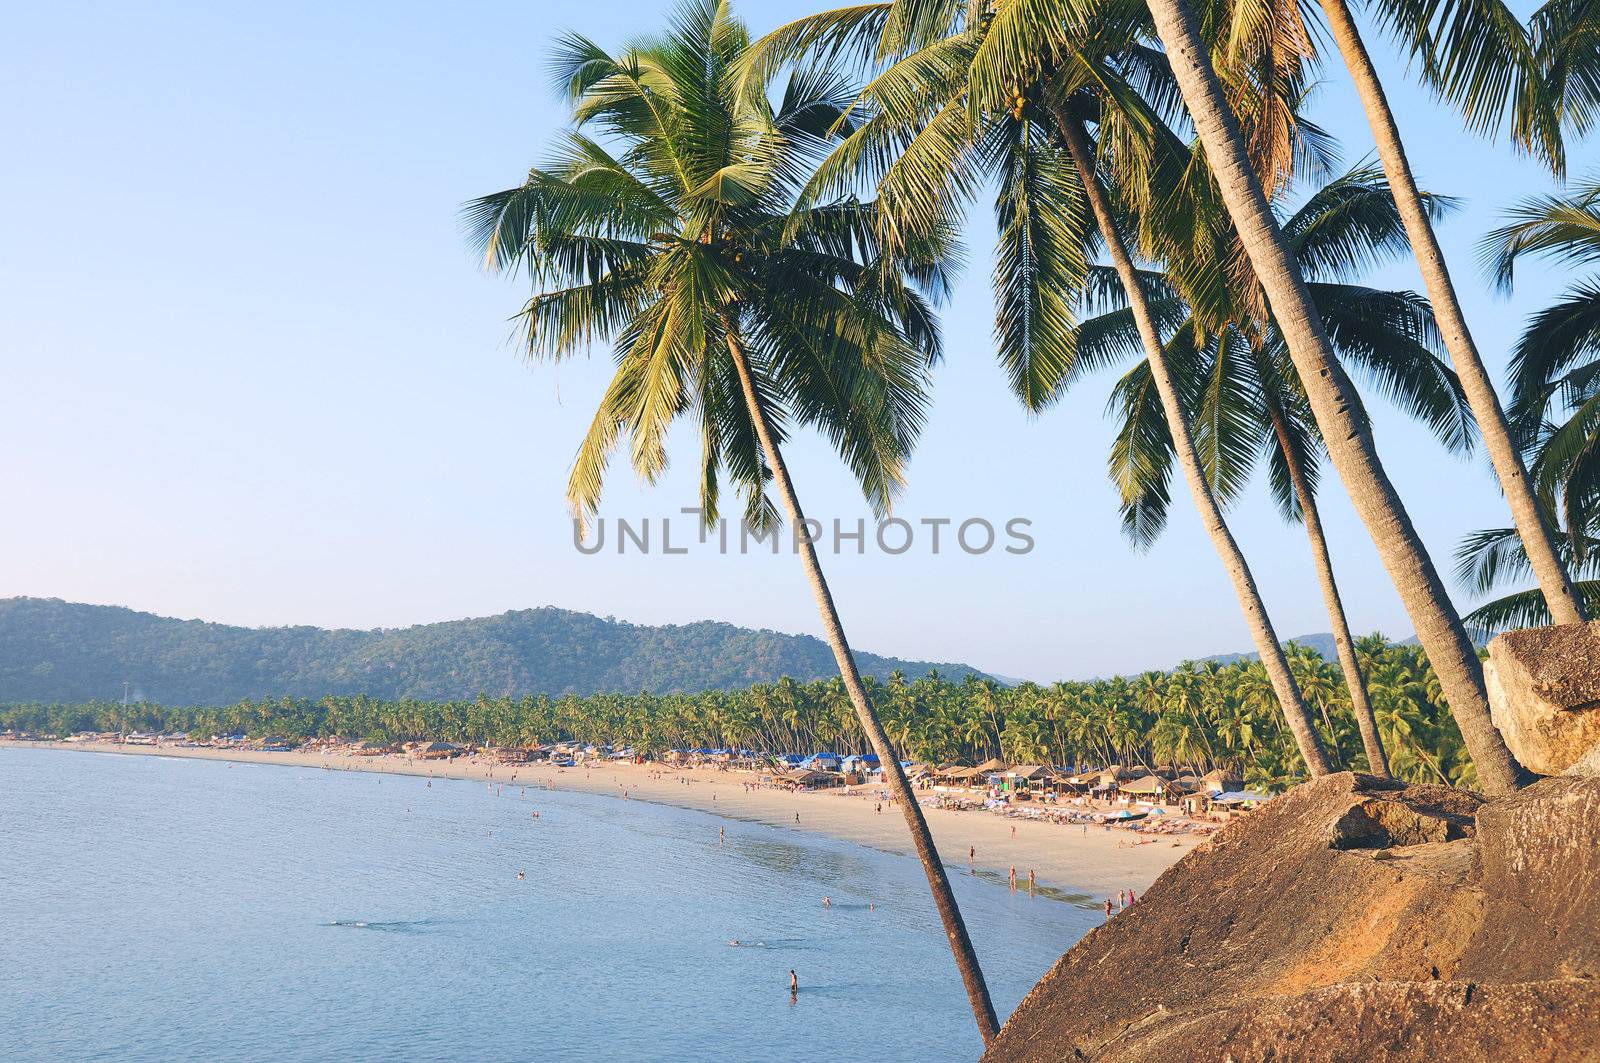 Palm trees with beautiful seascape on background with mountains, bay, sand beach and shacks.